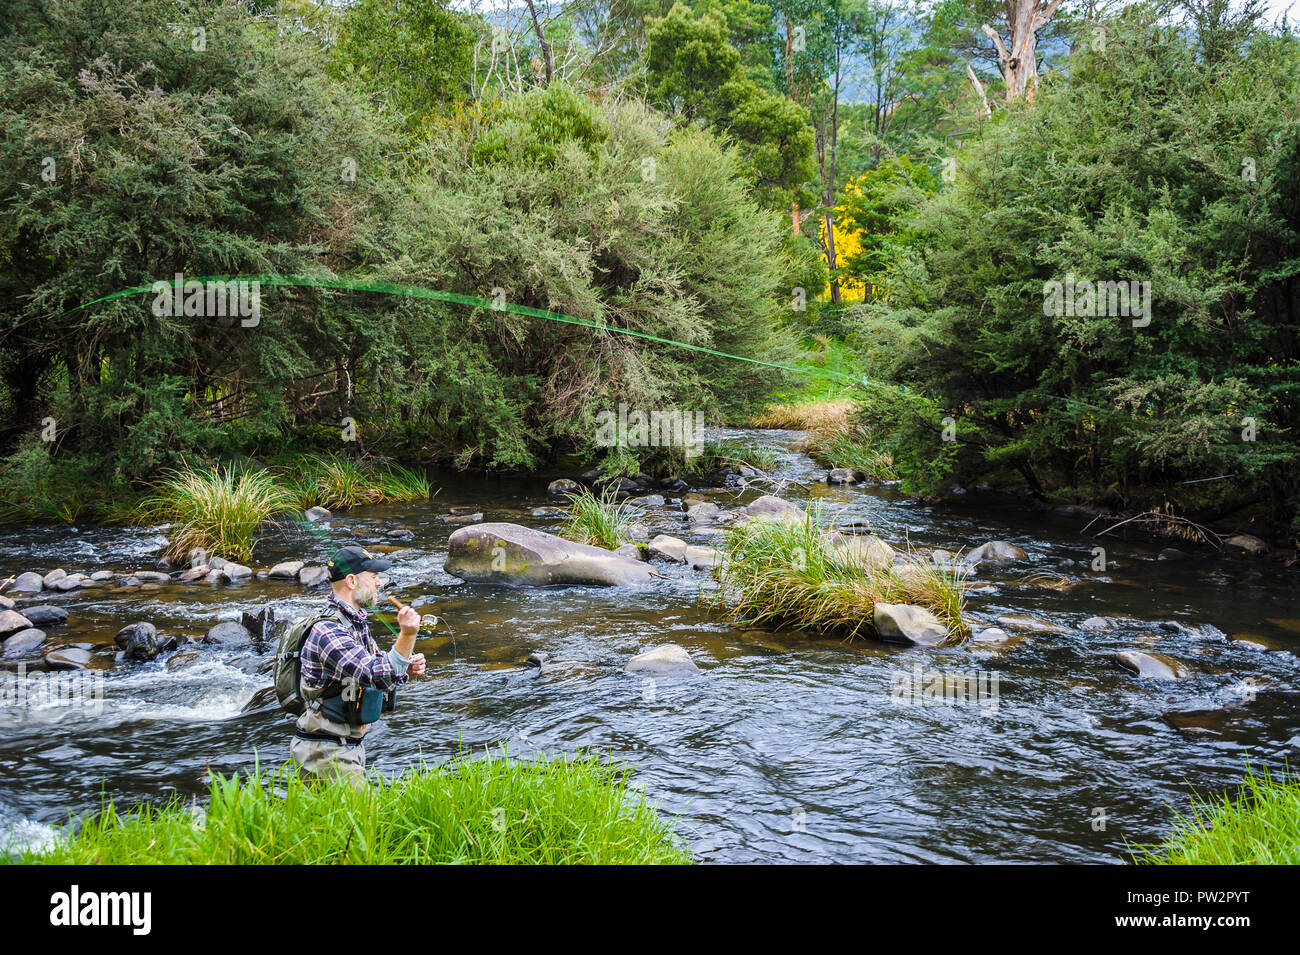 Expert fly-fishing angler, well prepared  and continuing to hone his fly-fishing skills in a wild river habitat. Stock Photo